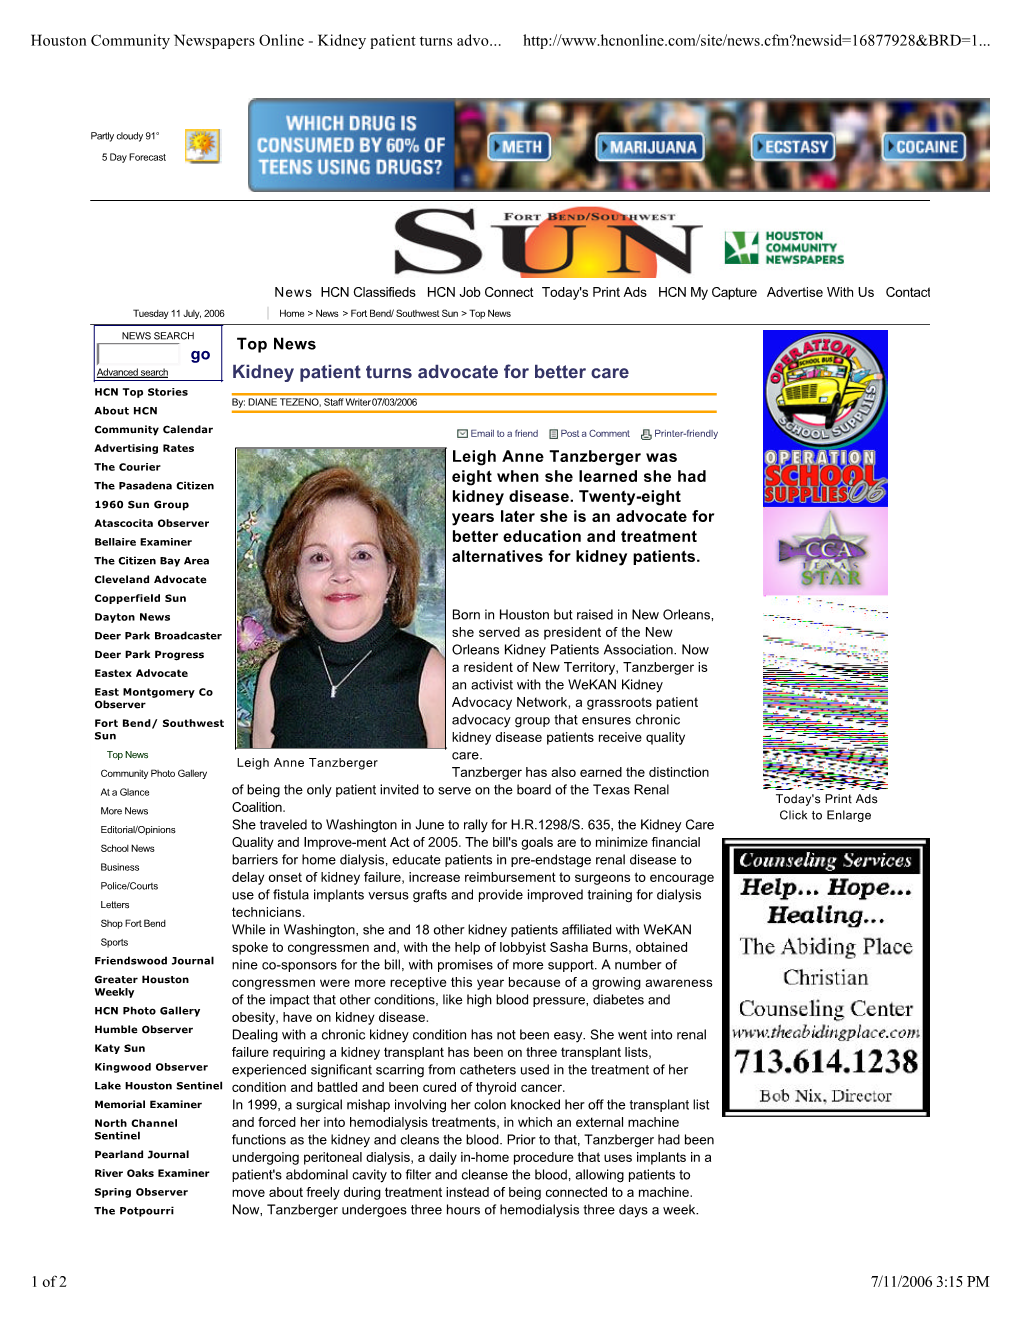 Kidney Patient Turns Advocate for Better Care HCN Top Stories By: DIANE TEZENO, Staff Writer07/03/2006 About HCN